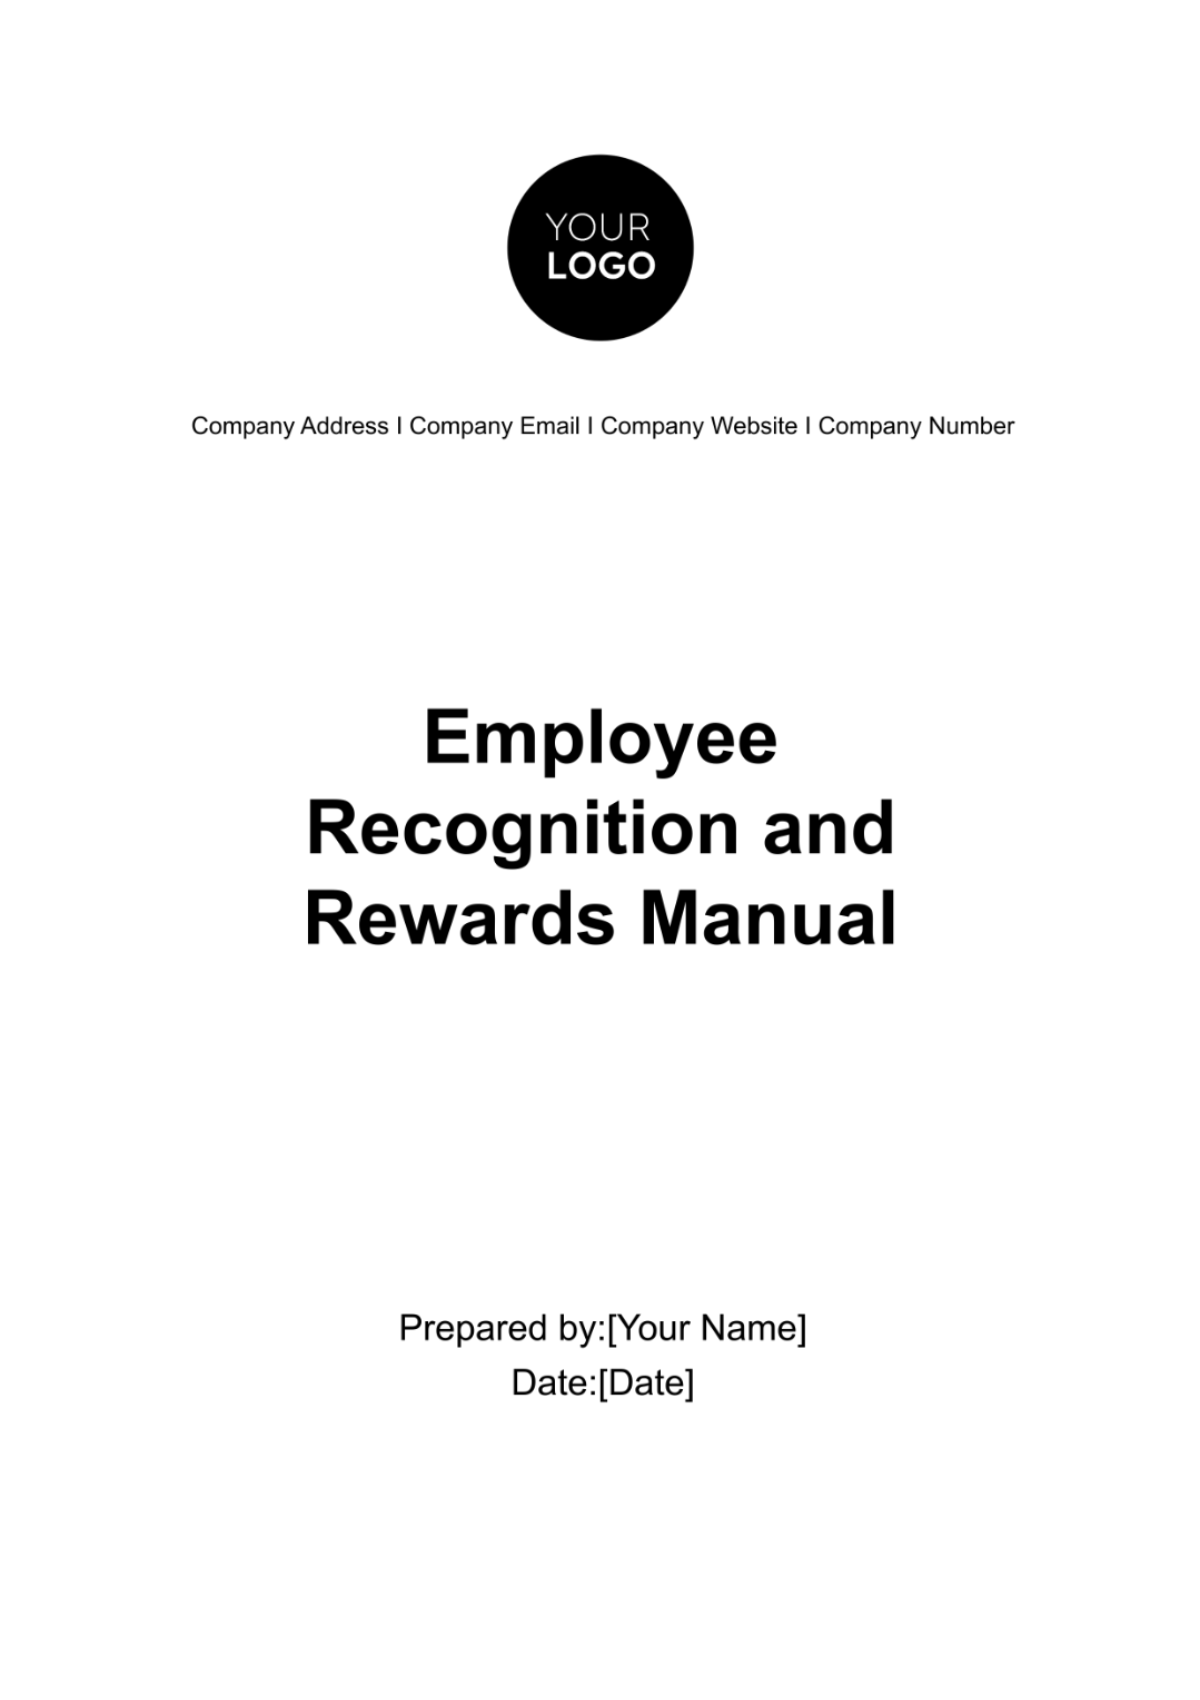 Free Employee Recognition and Rewards Manual HR Template